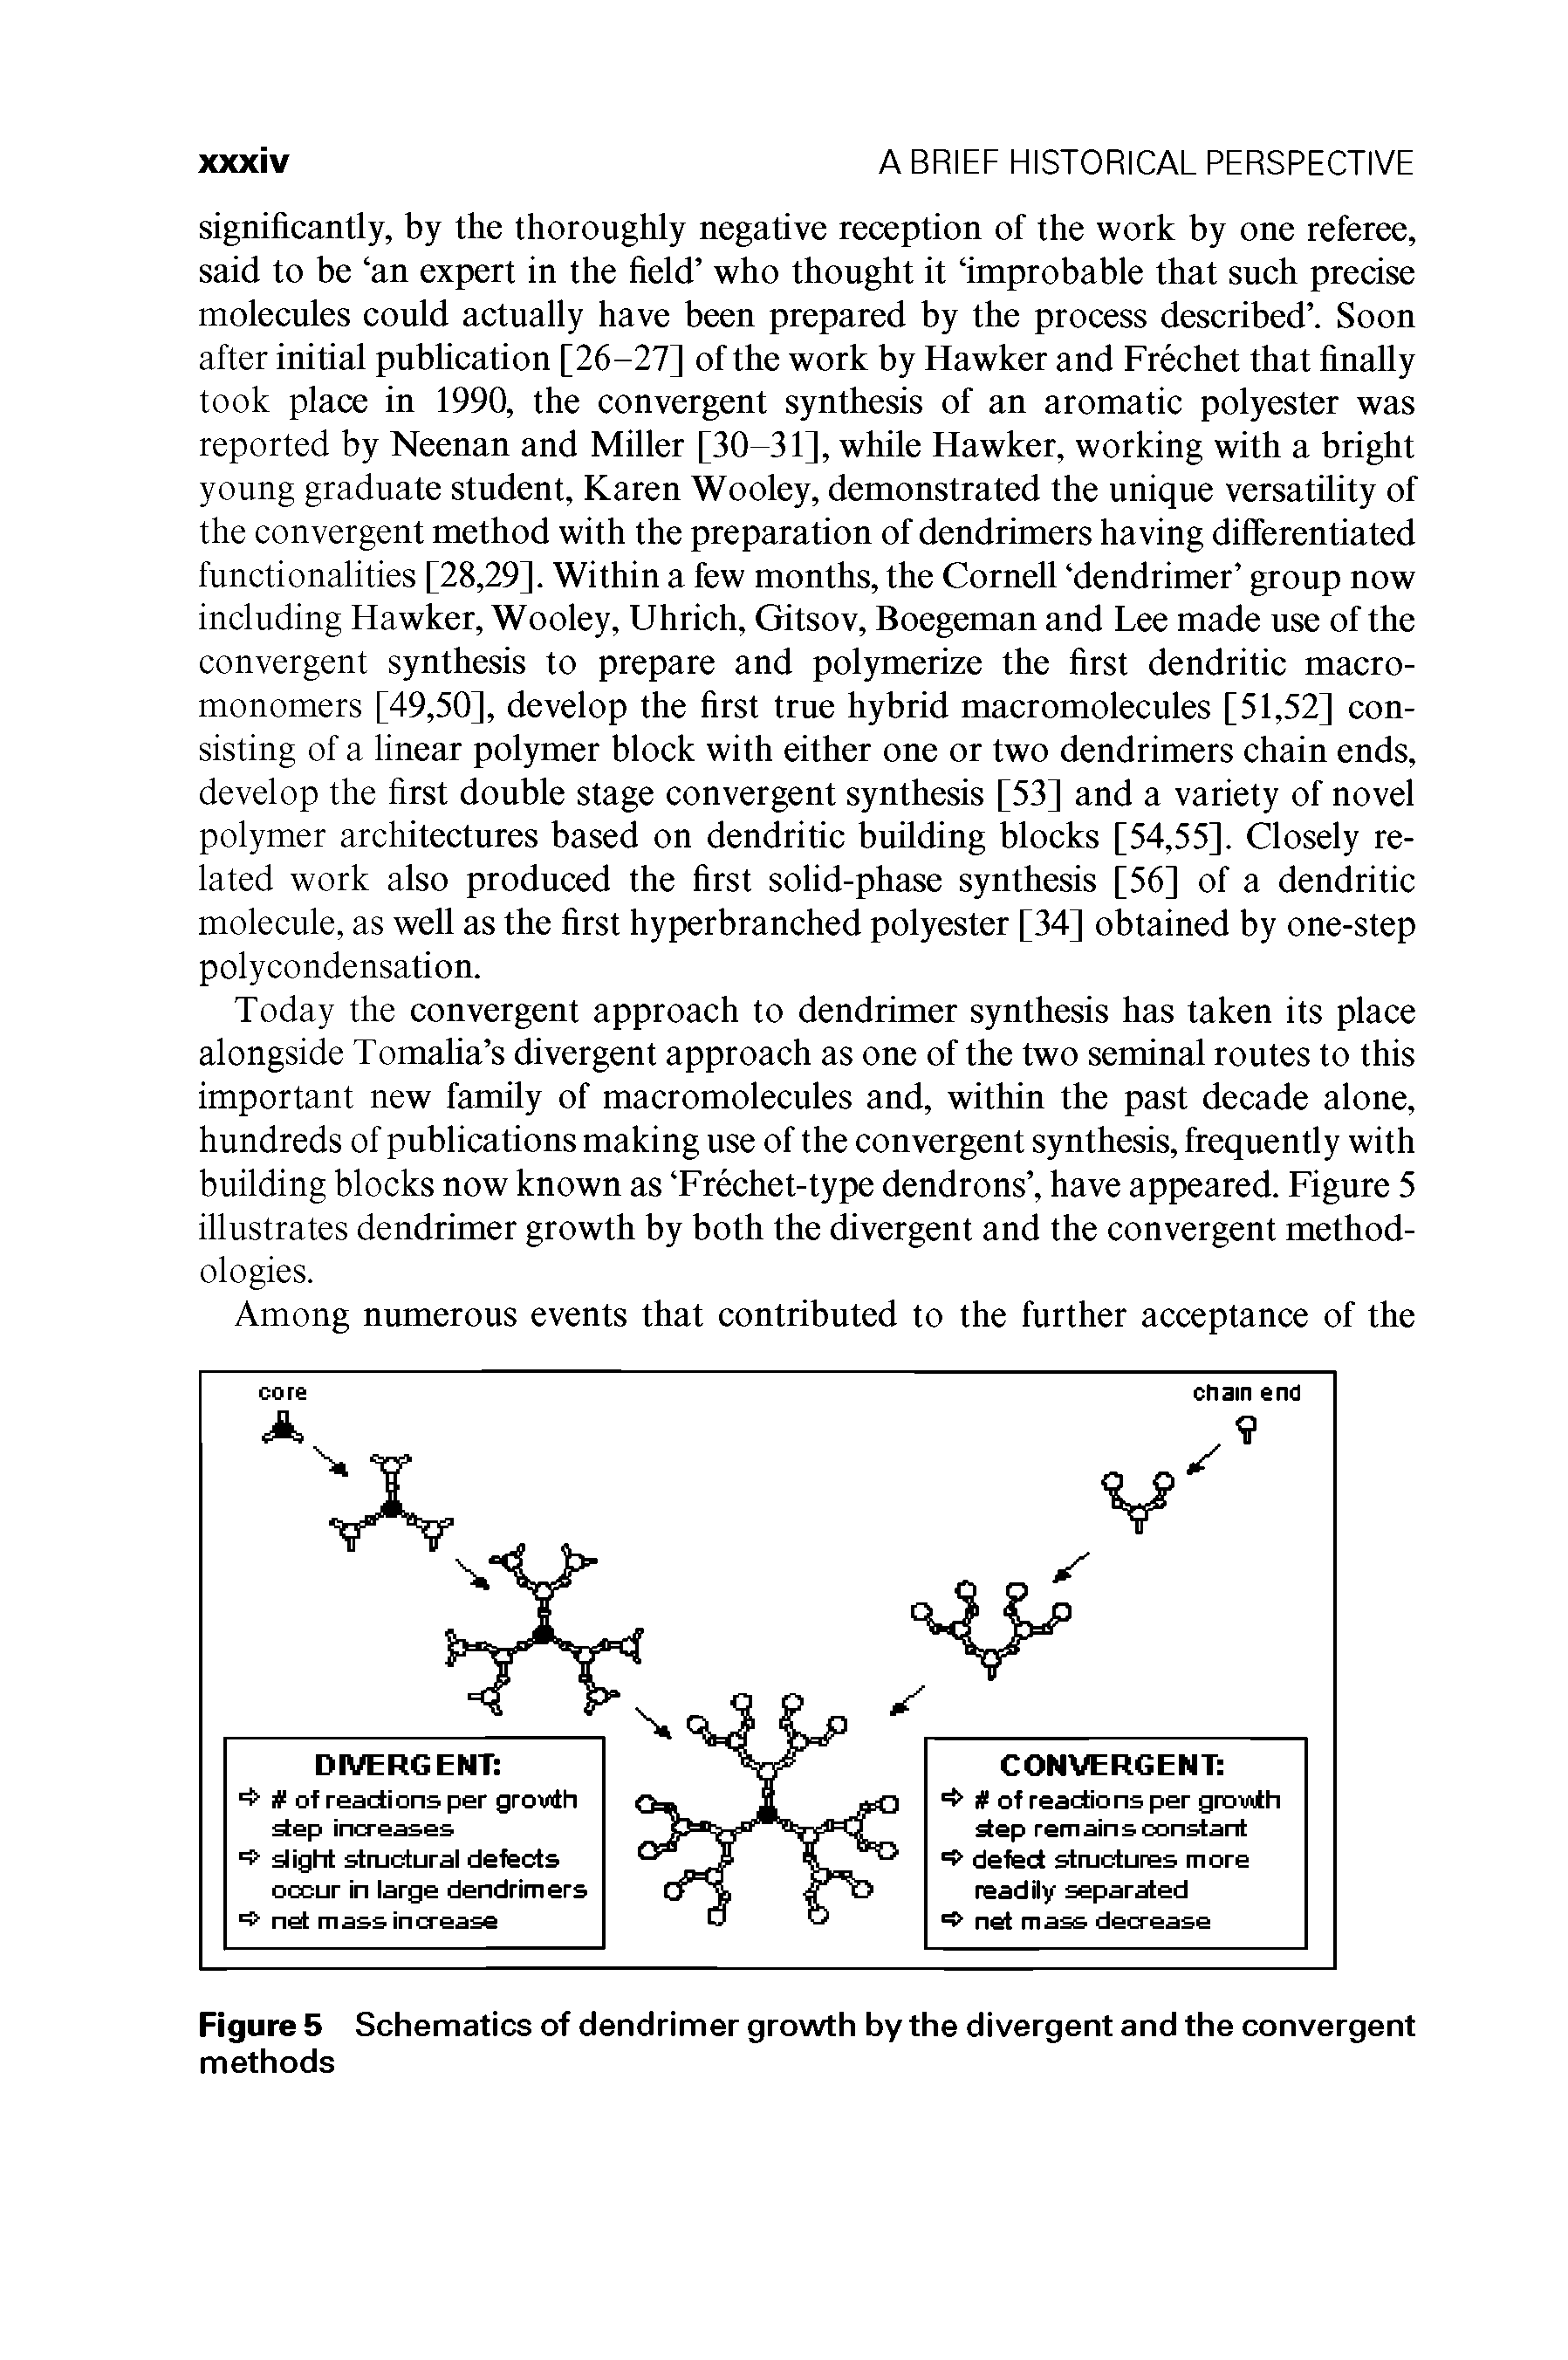 Figure 5 Schematics of dendrimer growth by the divergent and the convergent methods...